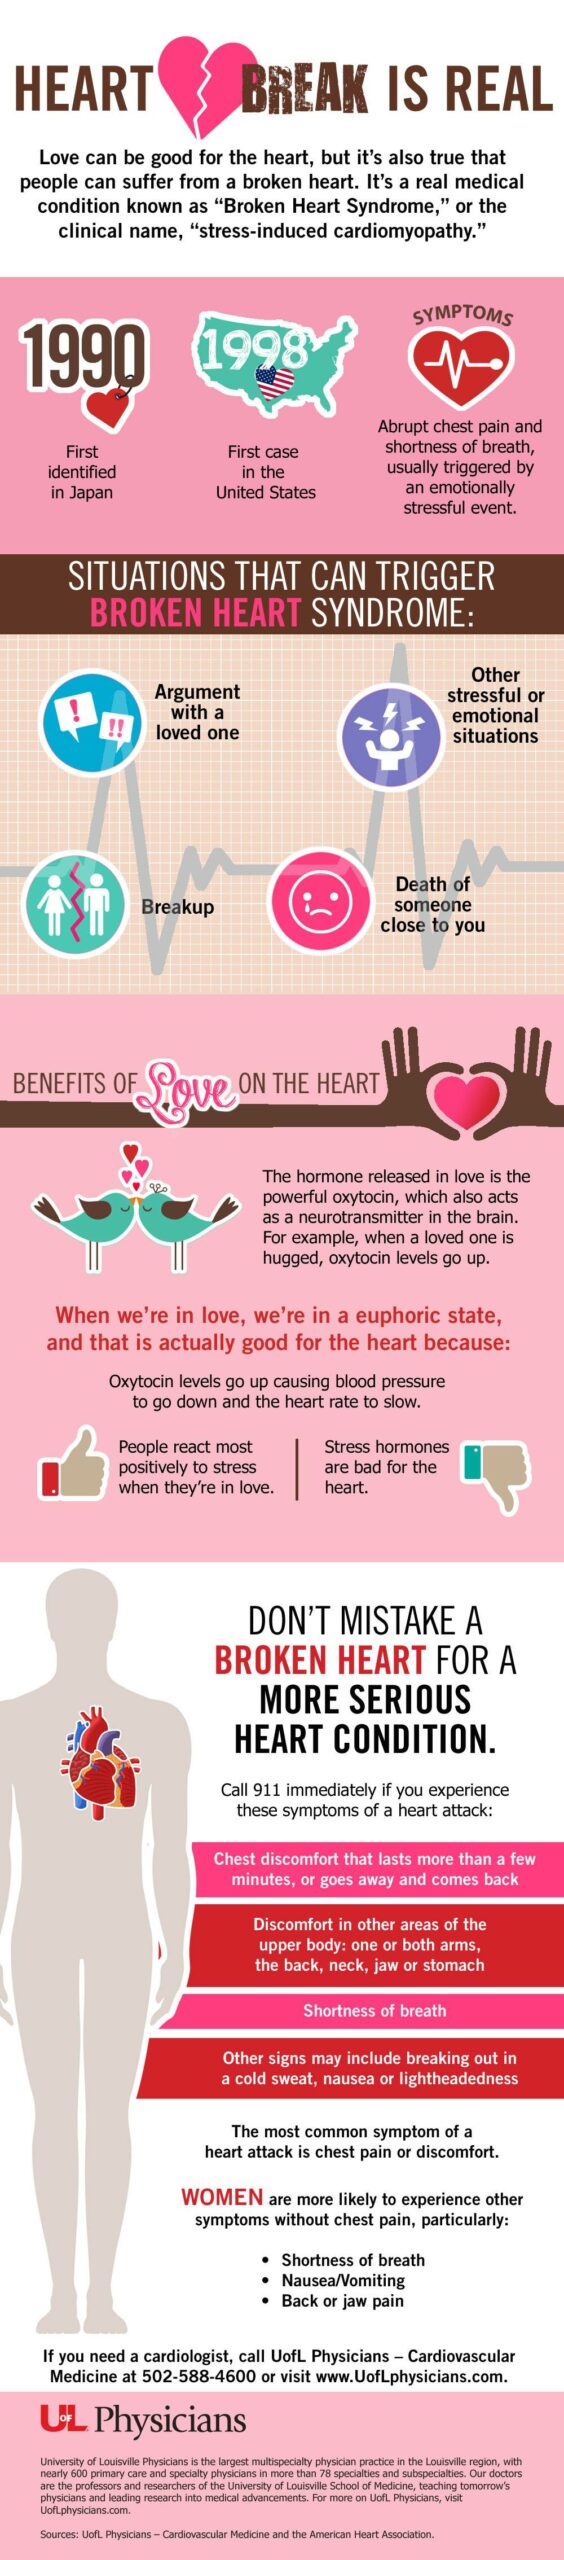 Heart Break is Real infographic containing information about the symptoms of Broken Heart Syndrome